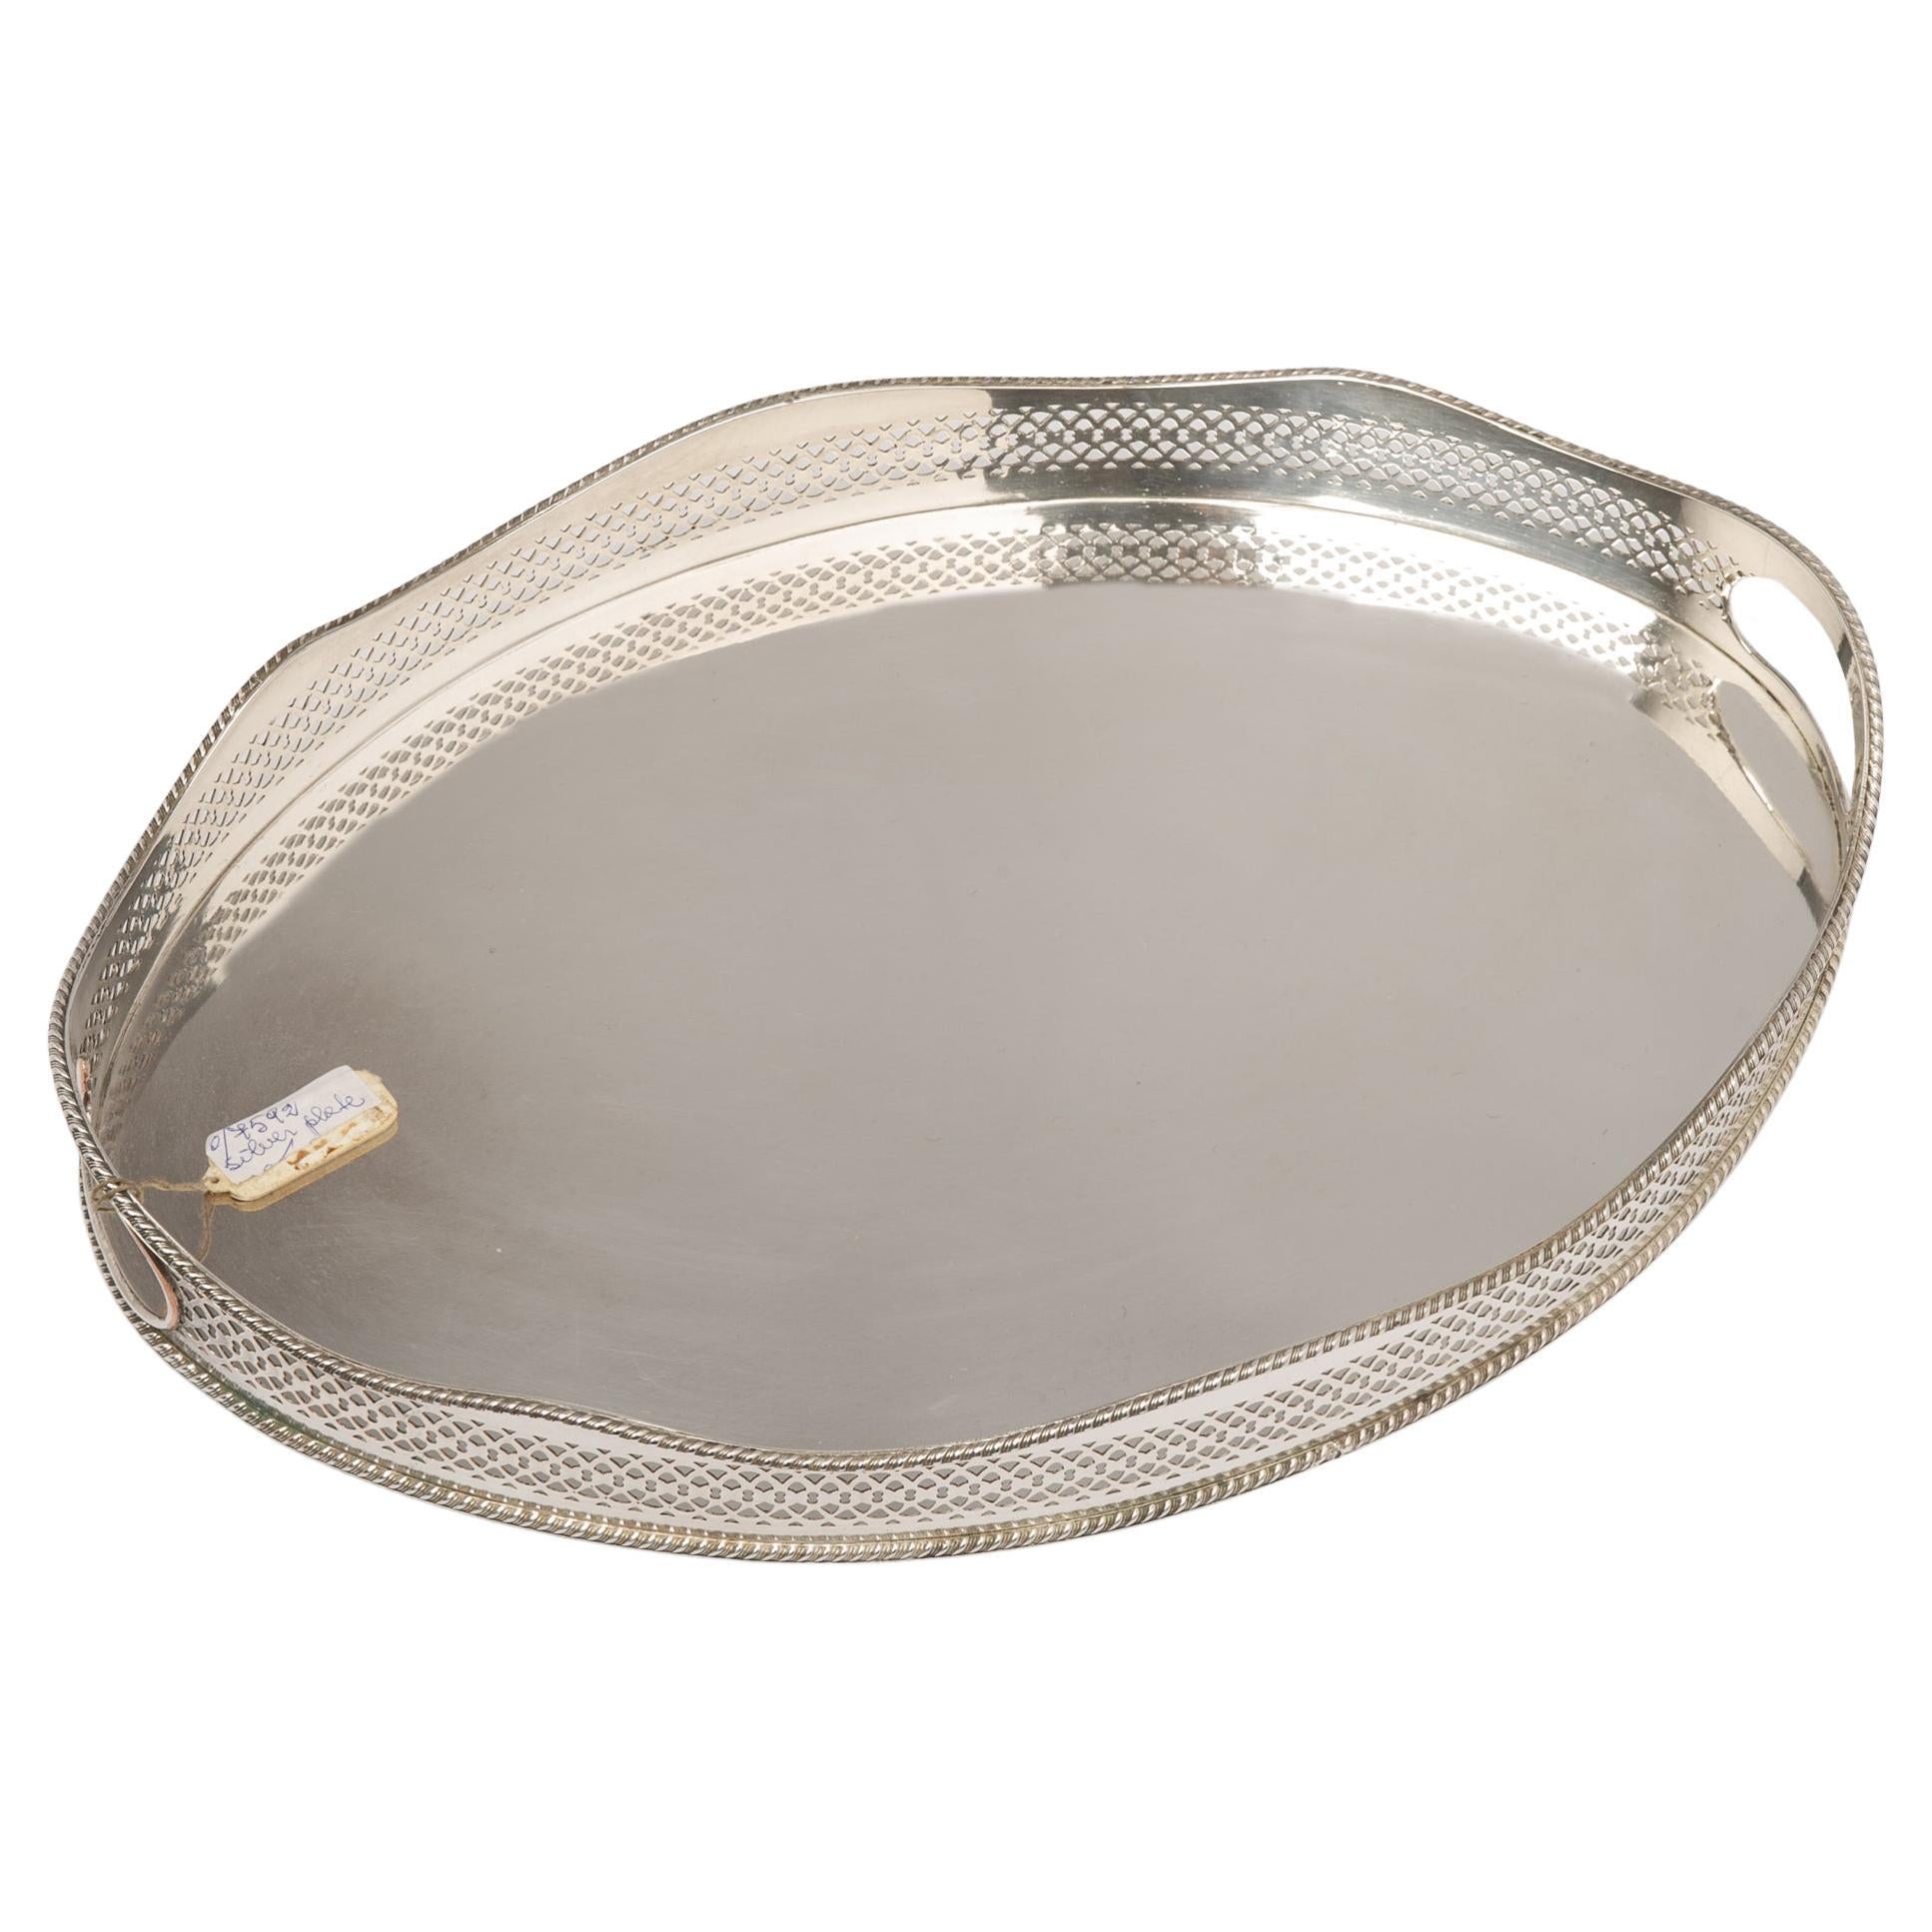 Oval little footed silver plated gallery tray: a perfect serving tray, simply elegant.